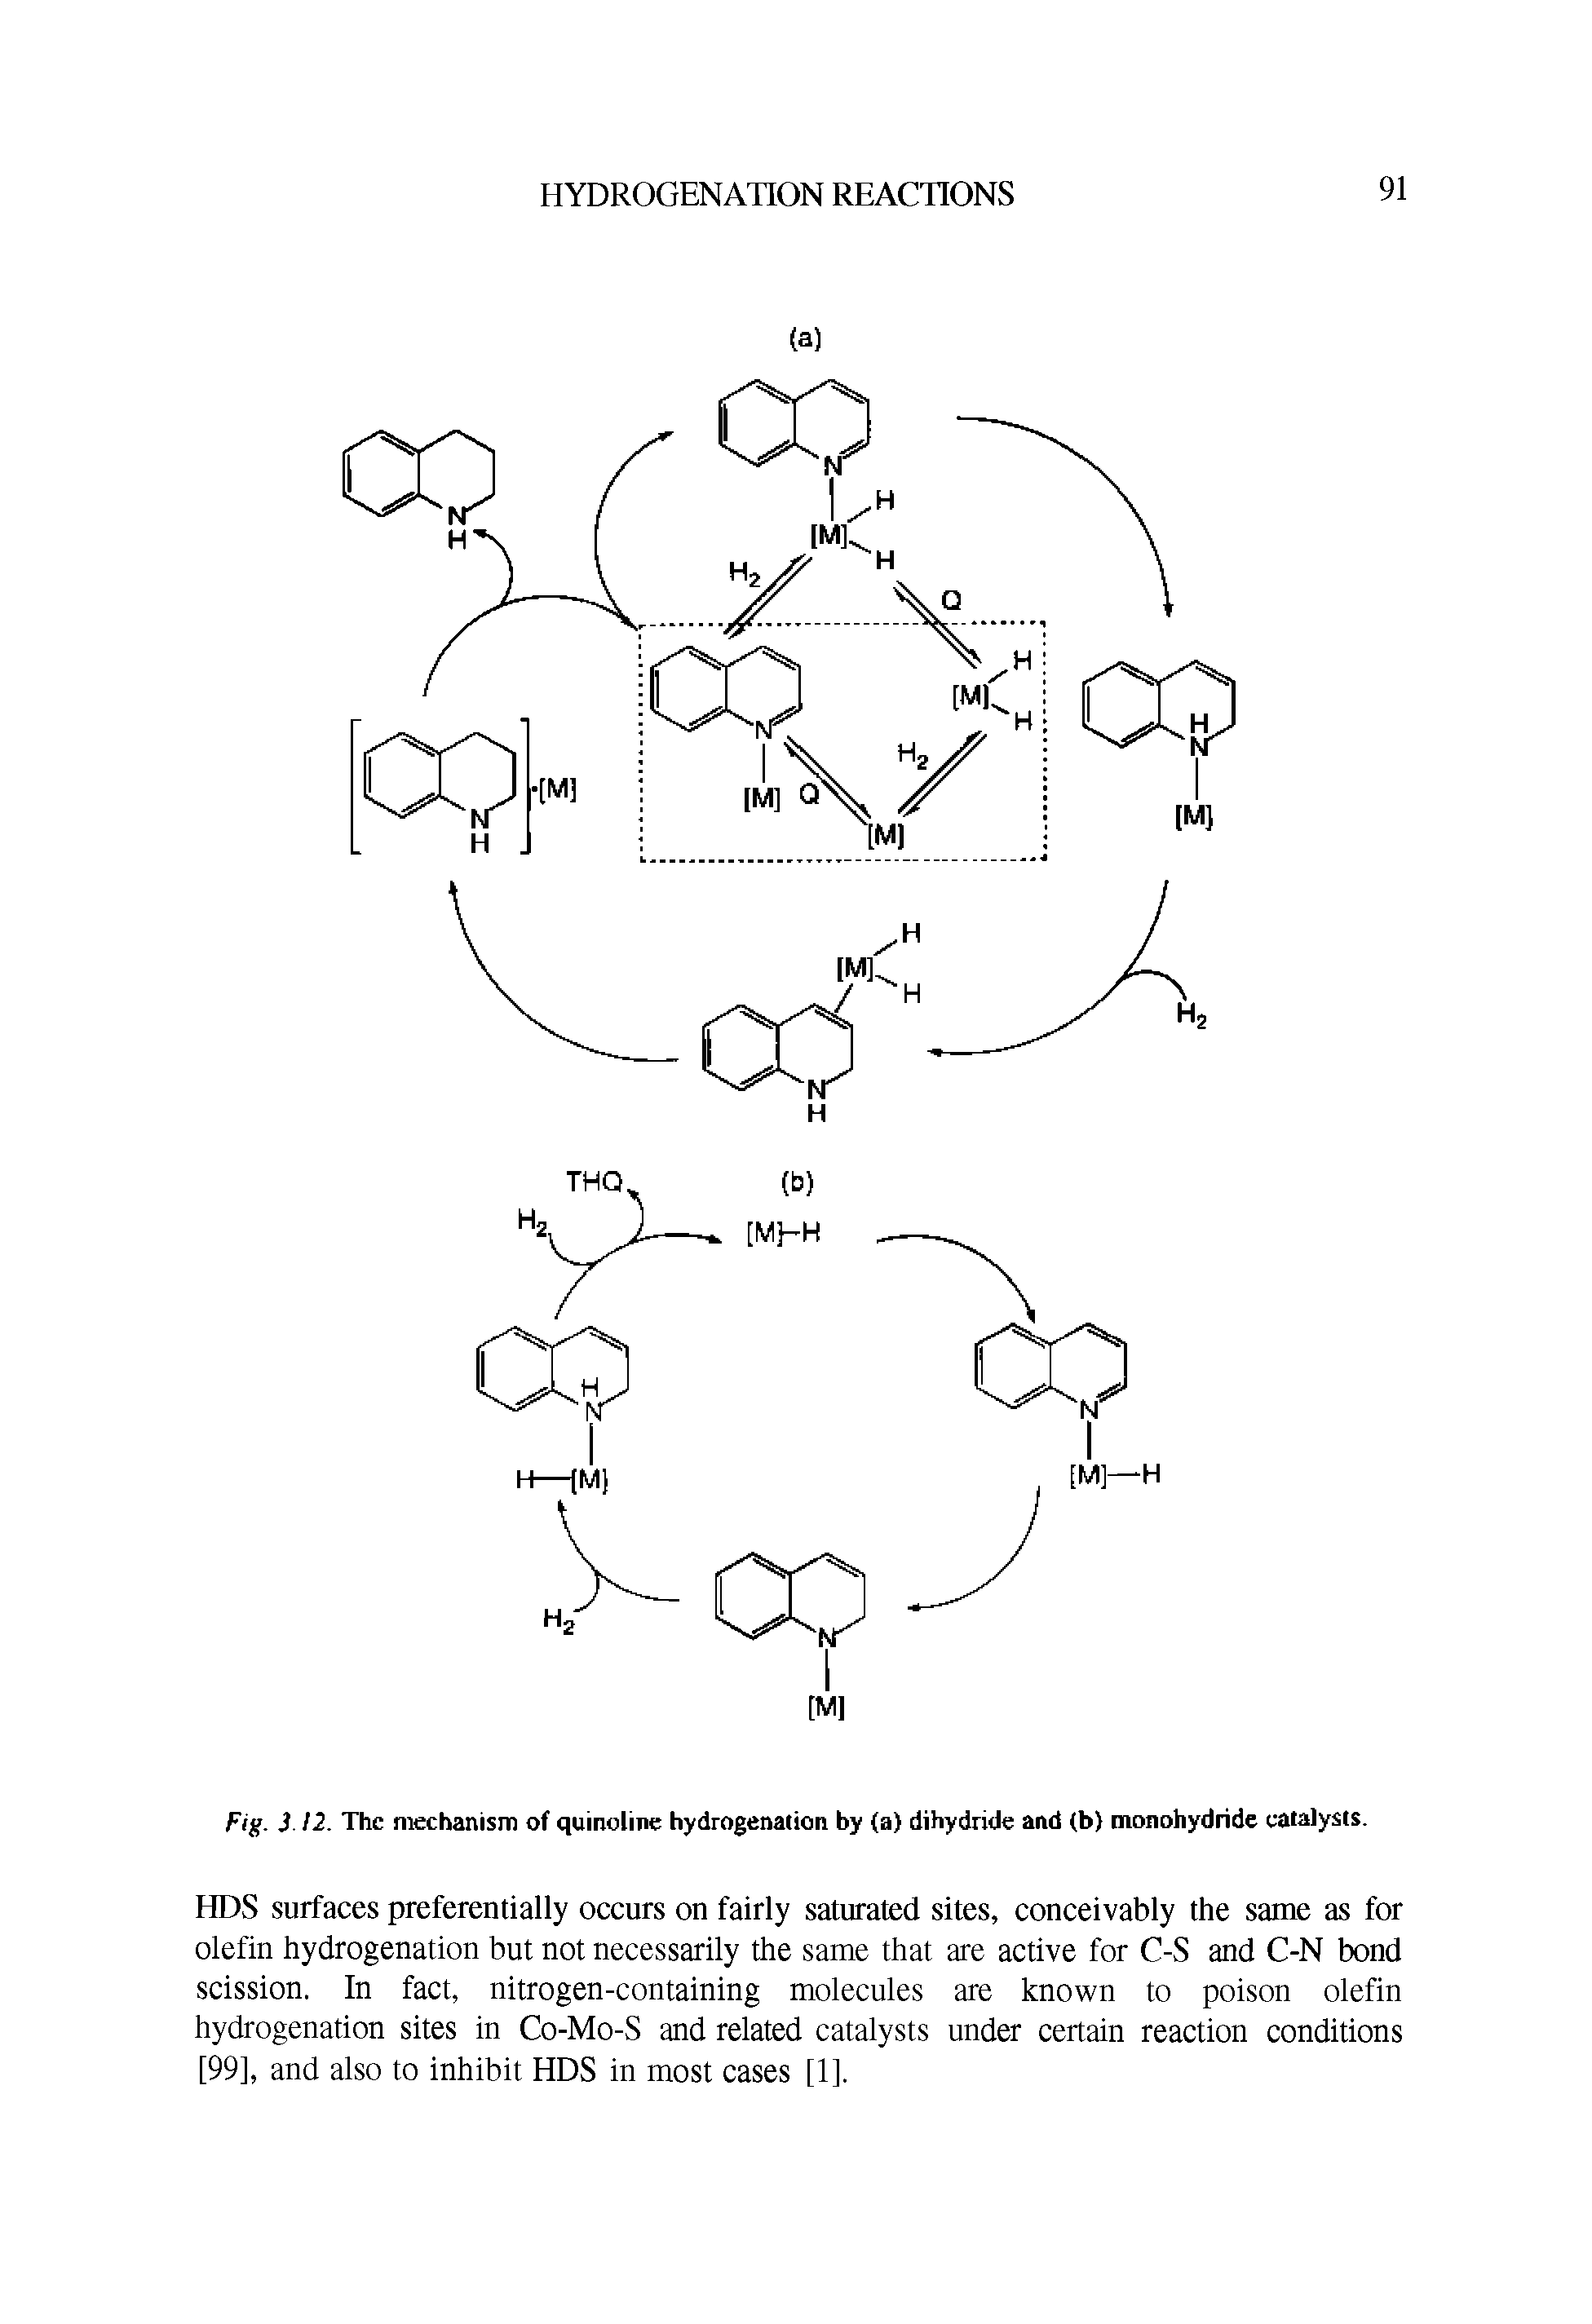 Fig. 3 12. The mechanism of quinoline hydrogenation by (a) dihydride and (b) nionohydride catalysts.